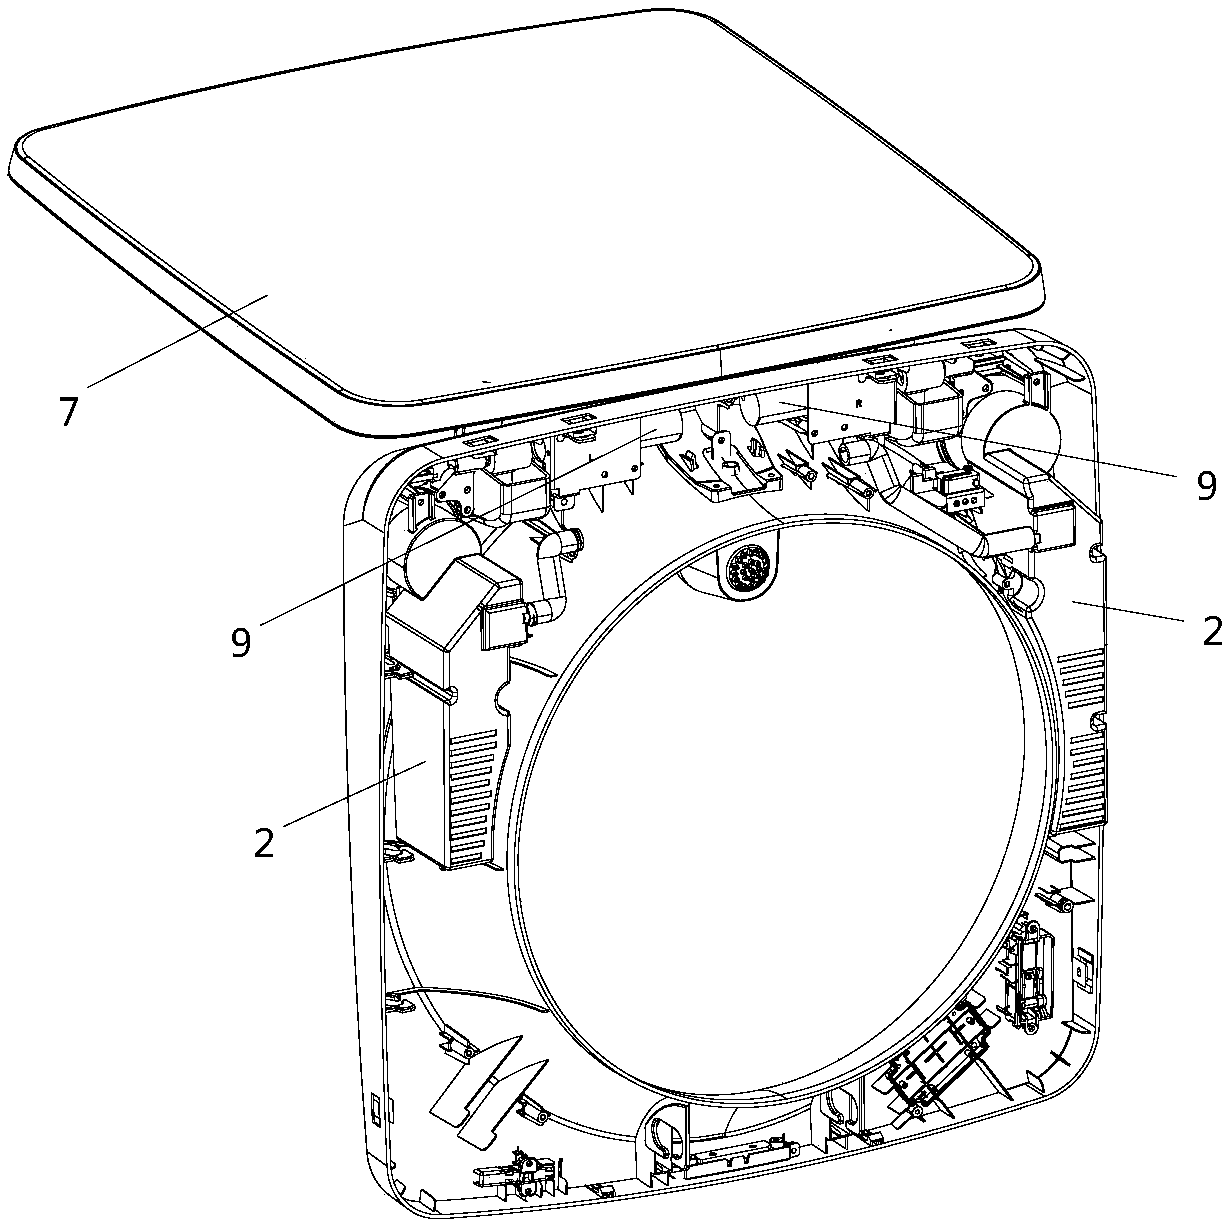 Disc seat structure of washing machine and washing machine with same disc seat structure